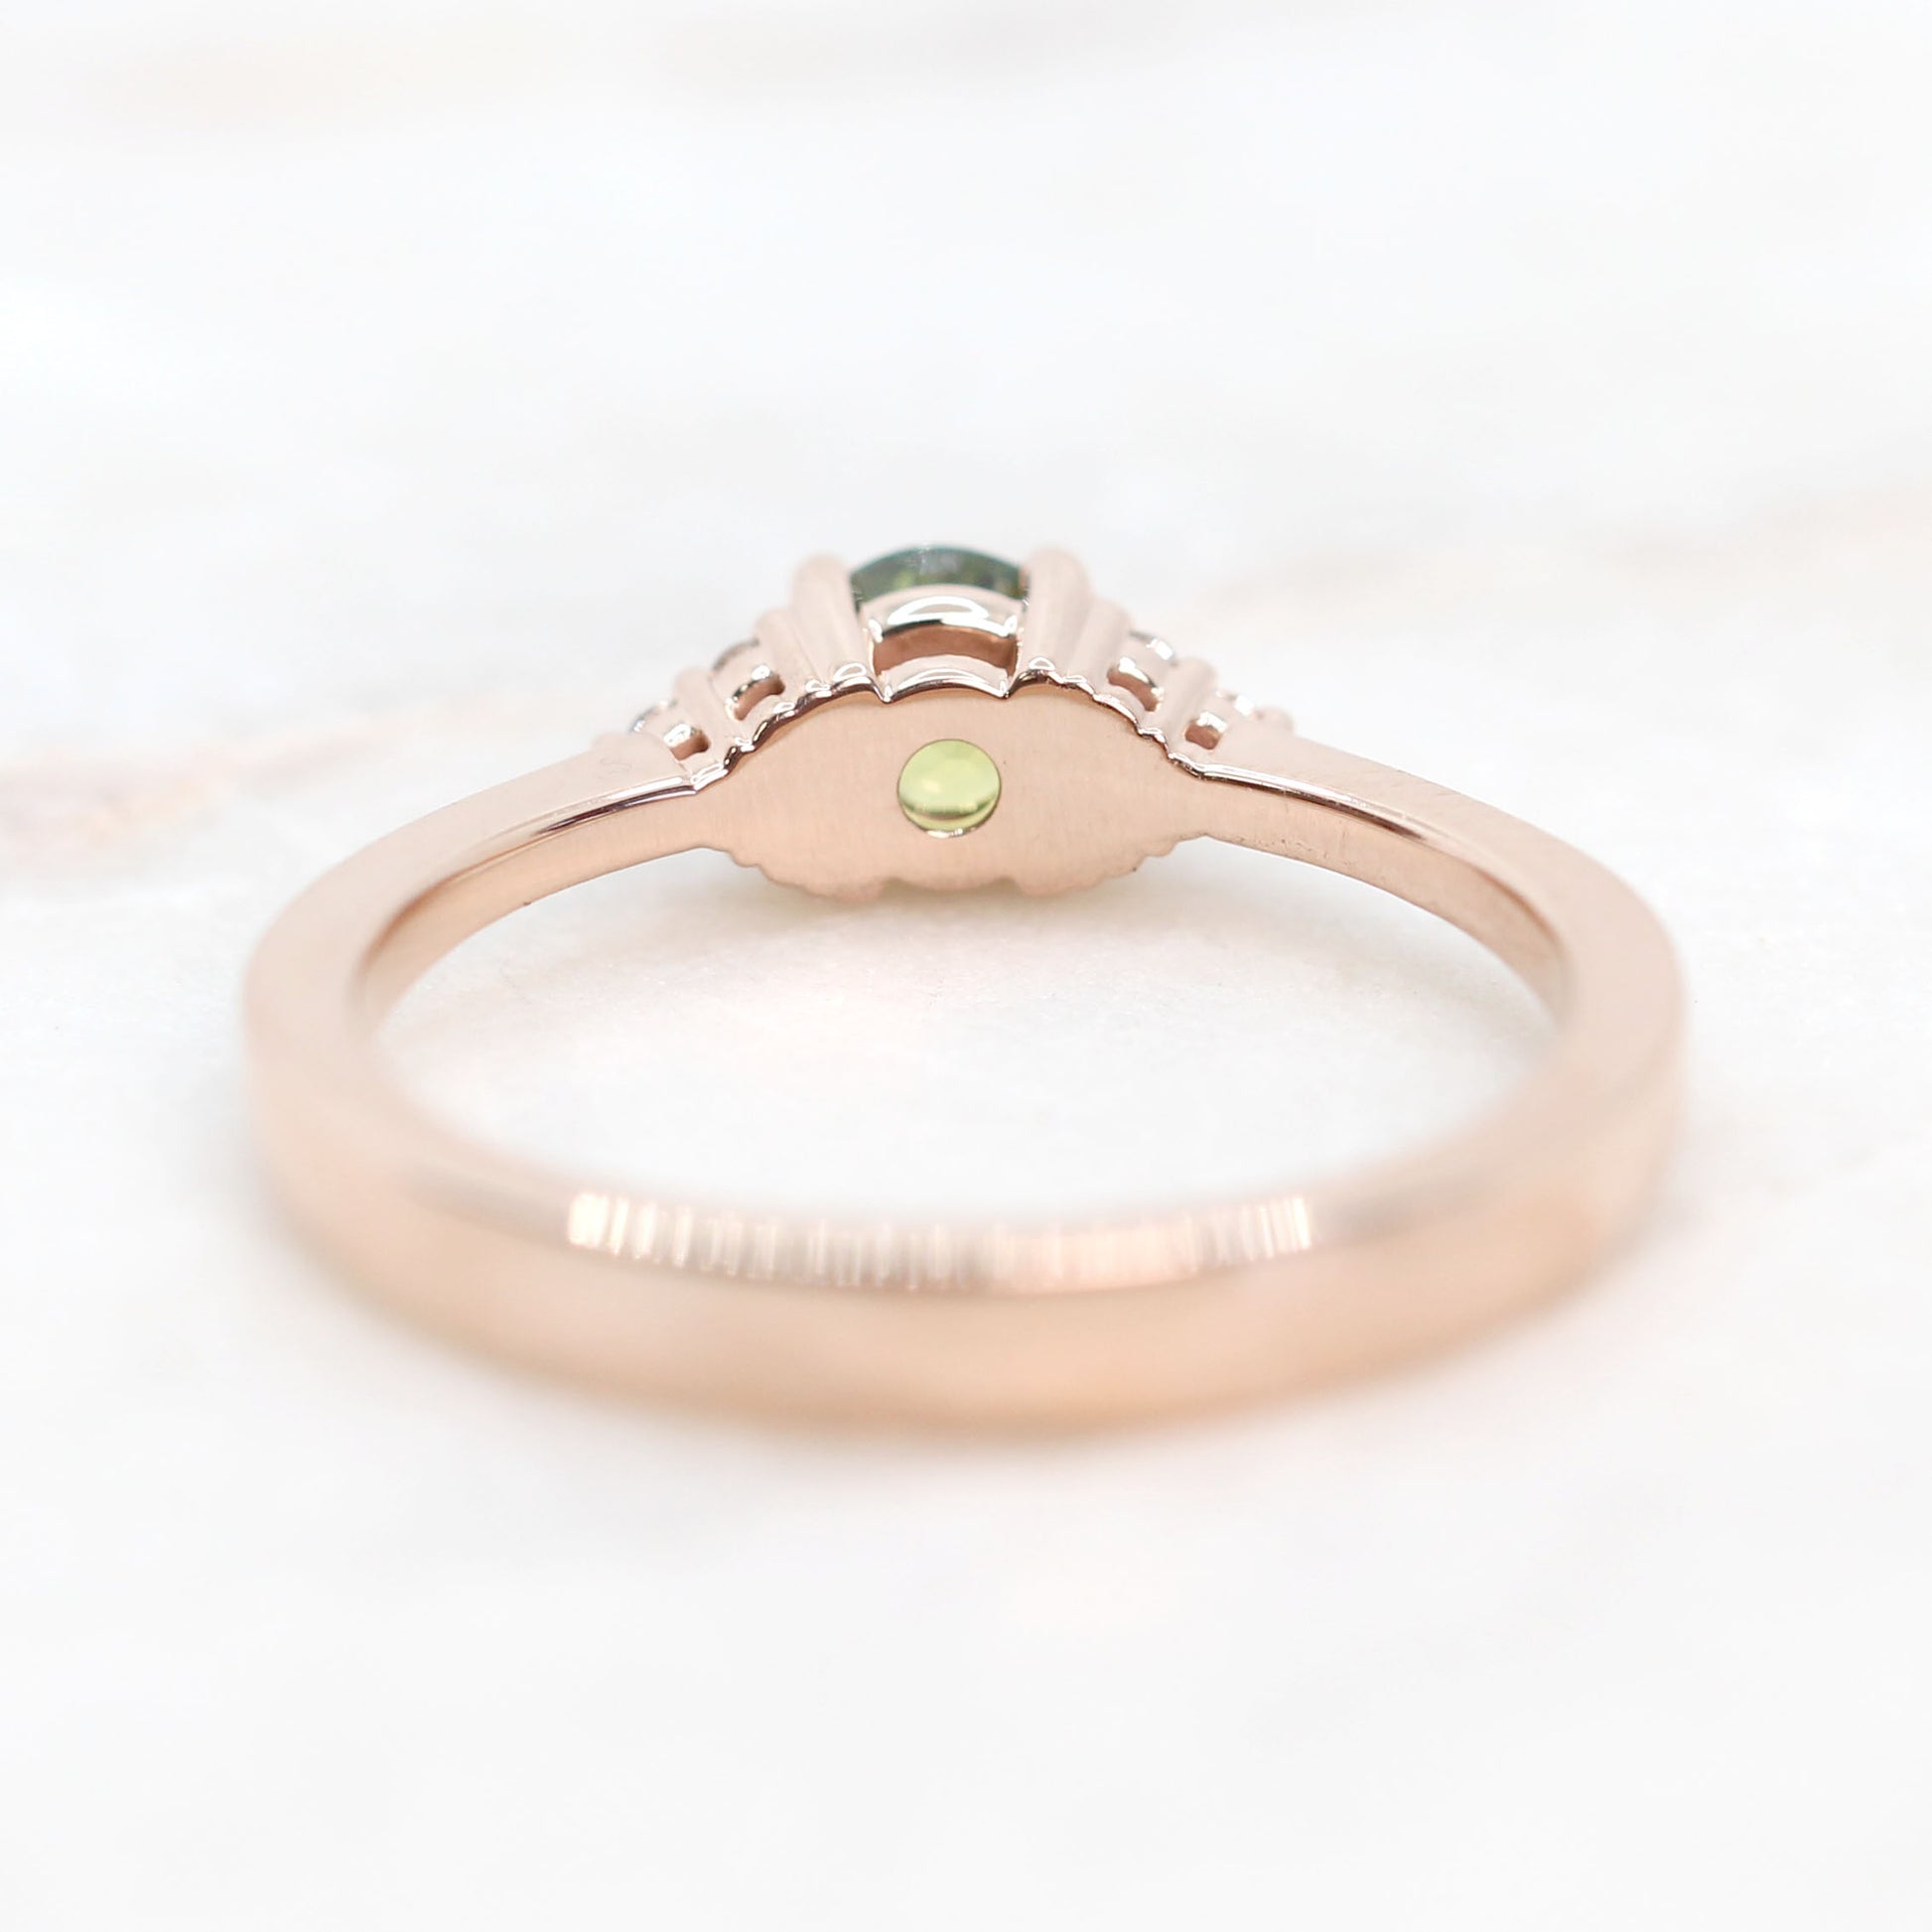 Imogene Ring with a 0.51 Carat Round Australian Parti Sapphire and White Canadian Accent Diamonds in 14k Rose Gold - Ready to Size and Ship - Midwinter Co. Alternative Bridal Rings and Modern Fine Jewelry